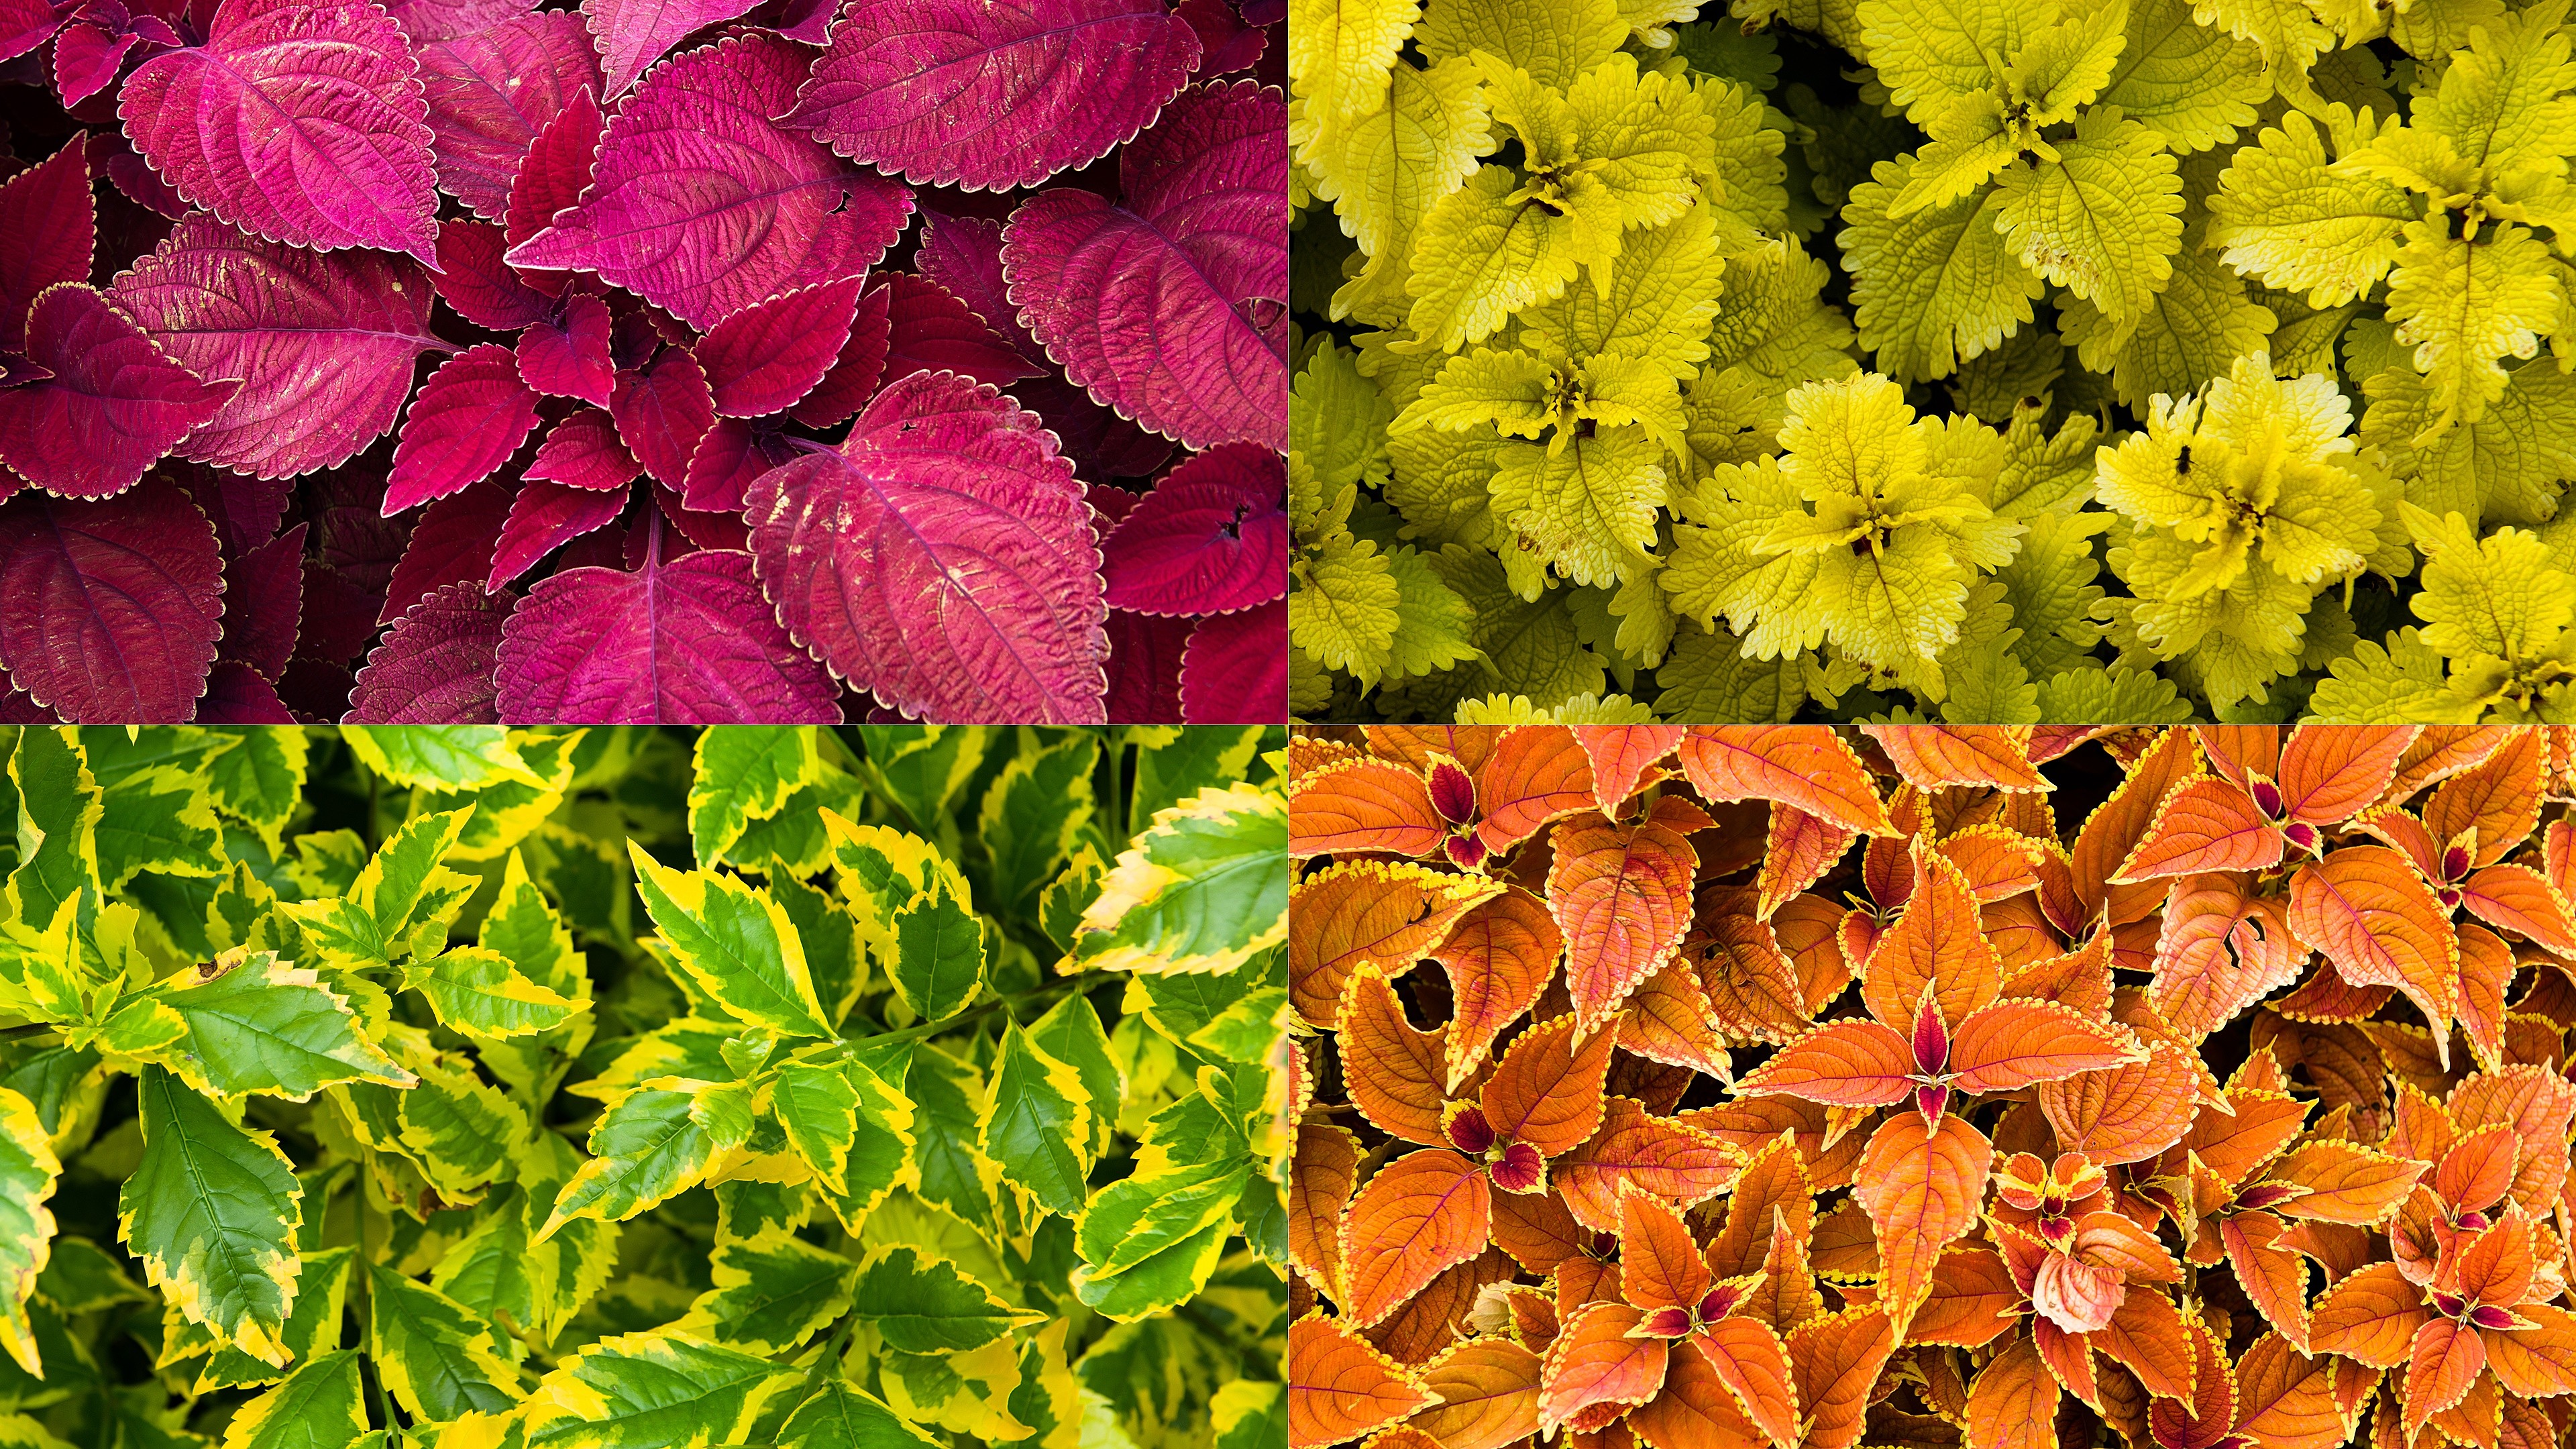 General 3840x2160 plants nature outdoors colorful red leaves top view collage